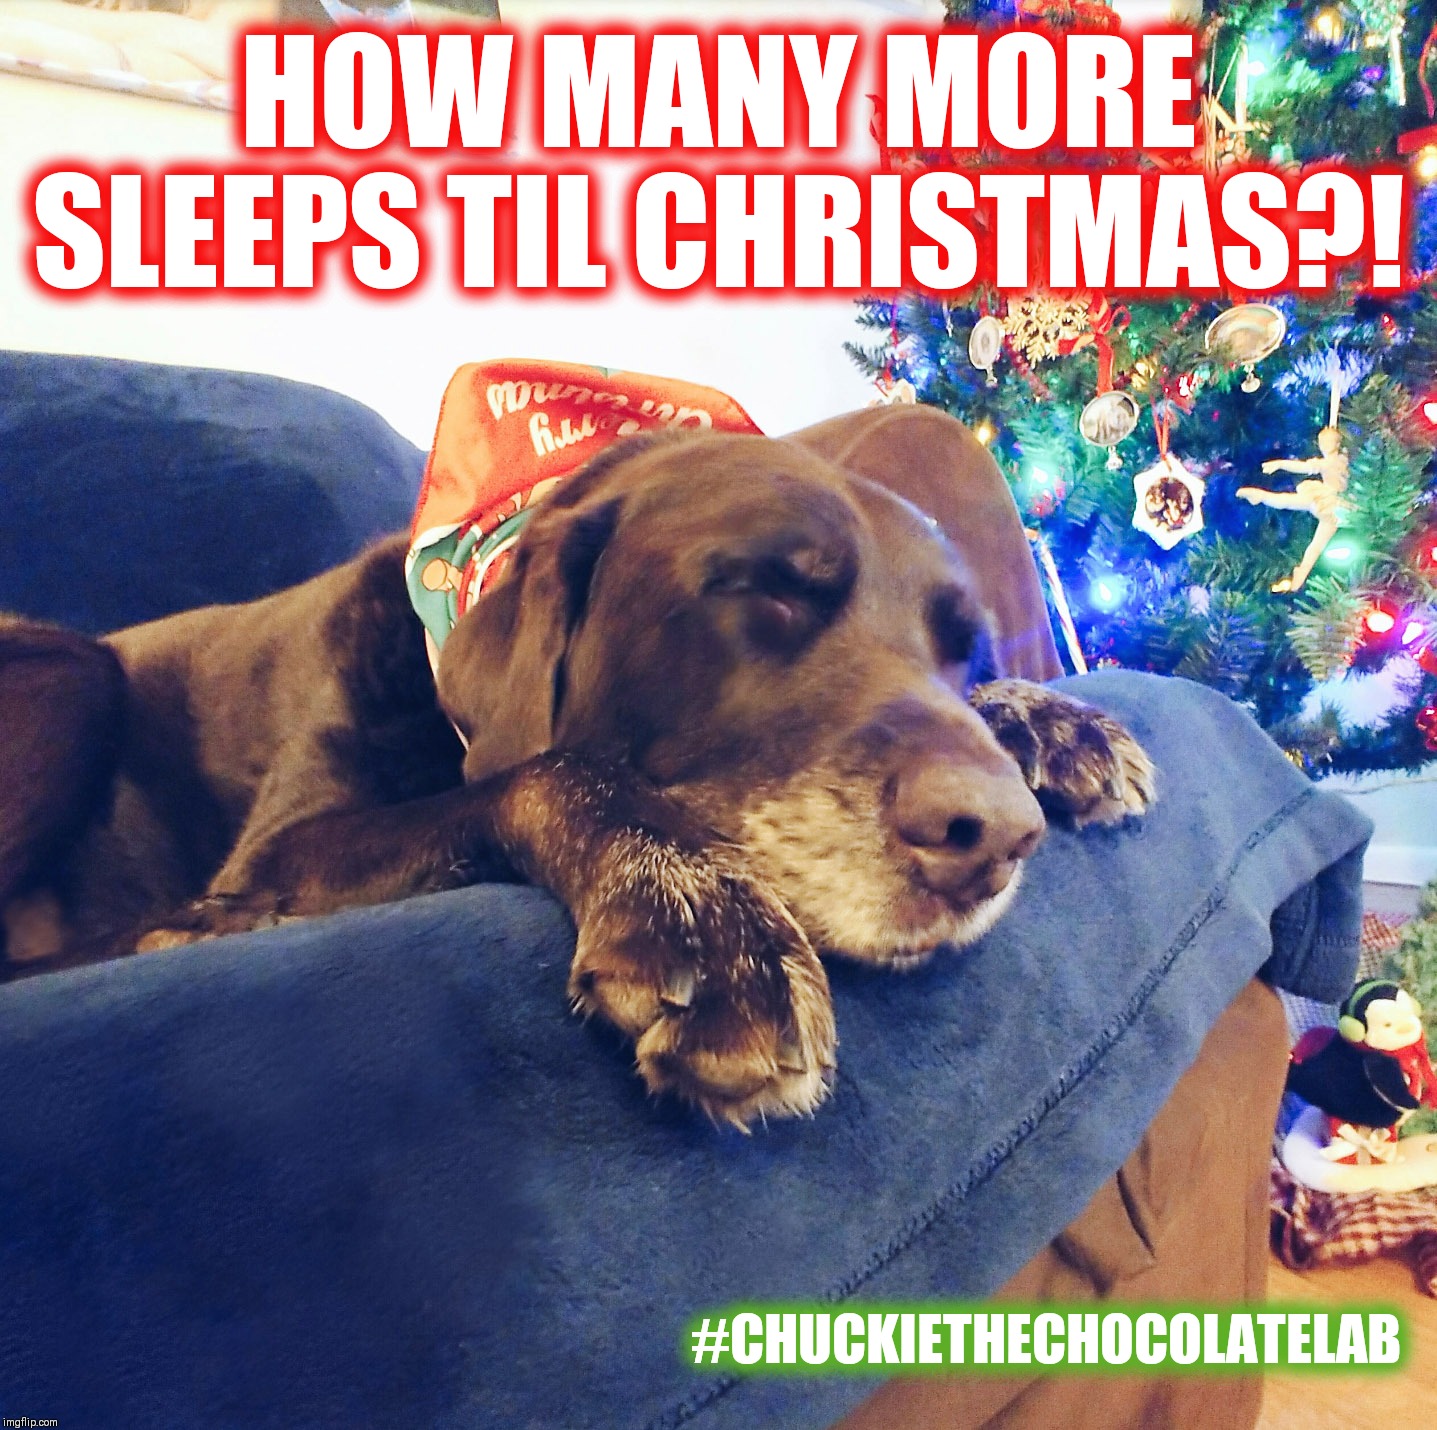 How many sleeps til Christmas? | HOW MANY MORE SLEEPS TIL CHRISTMAS?! #CHUCKIETHECHOCOLATELAB | image tagged in chuckie the chocolate lab,dogs,memes,christmas,sleeps til christmas,christmas countdown | made w/ Imgflip meme maker